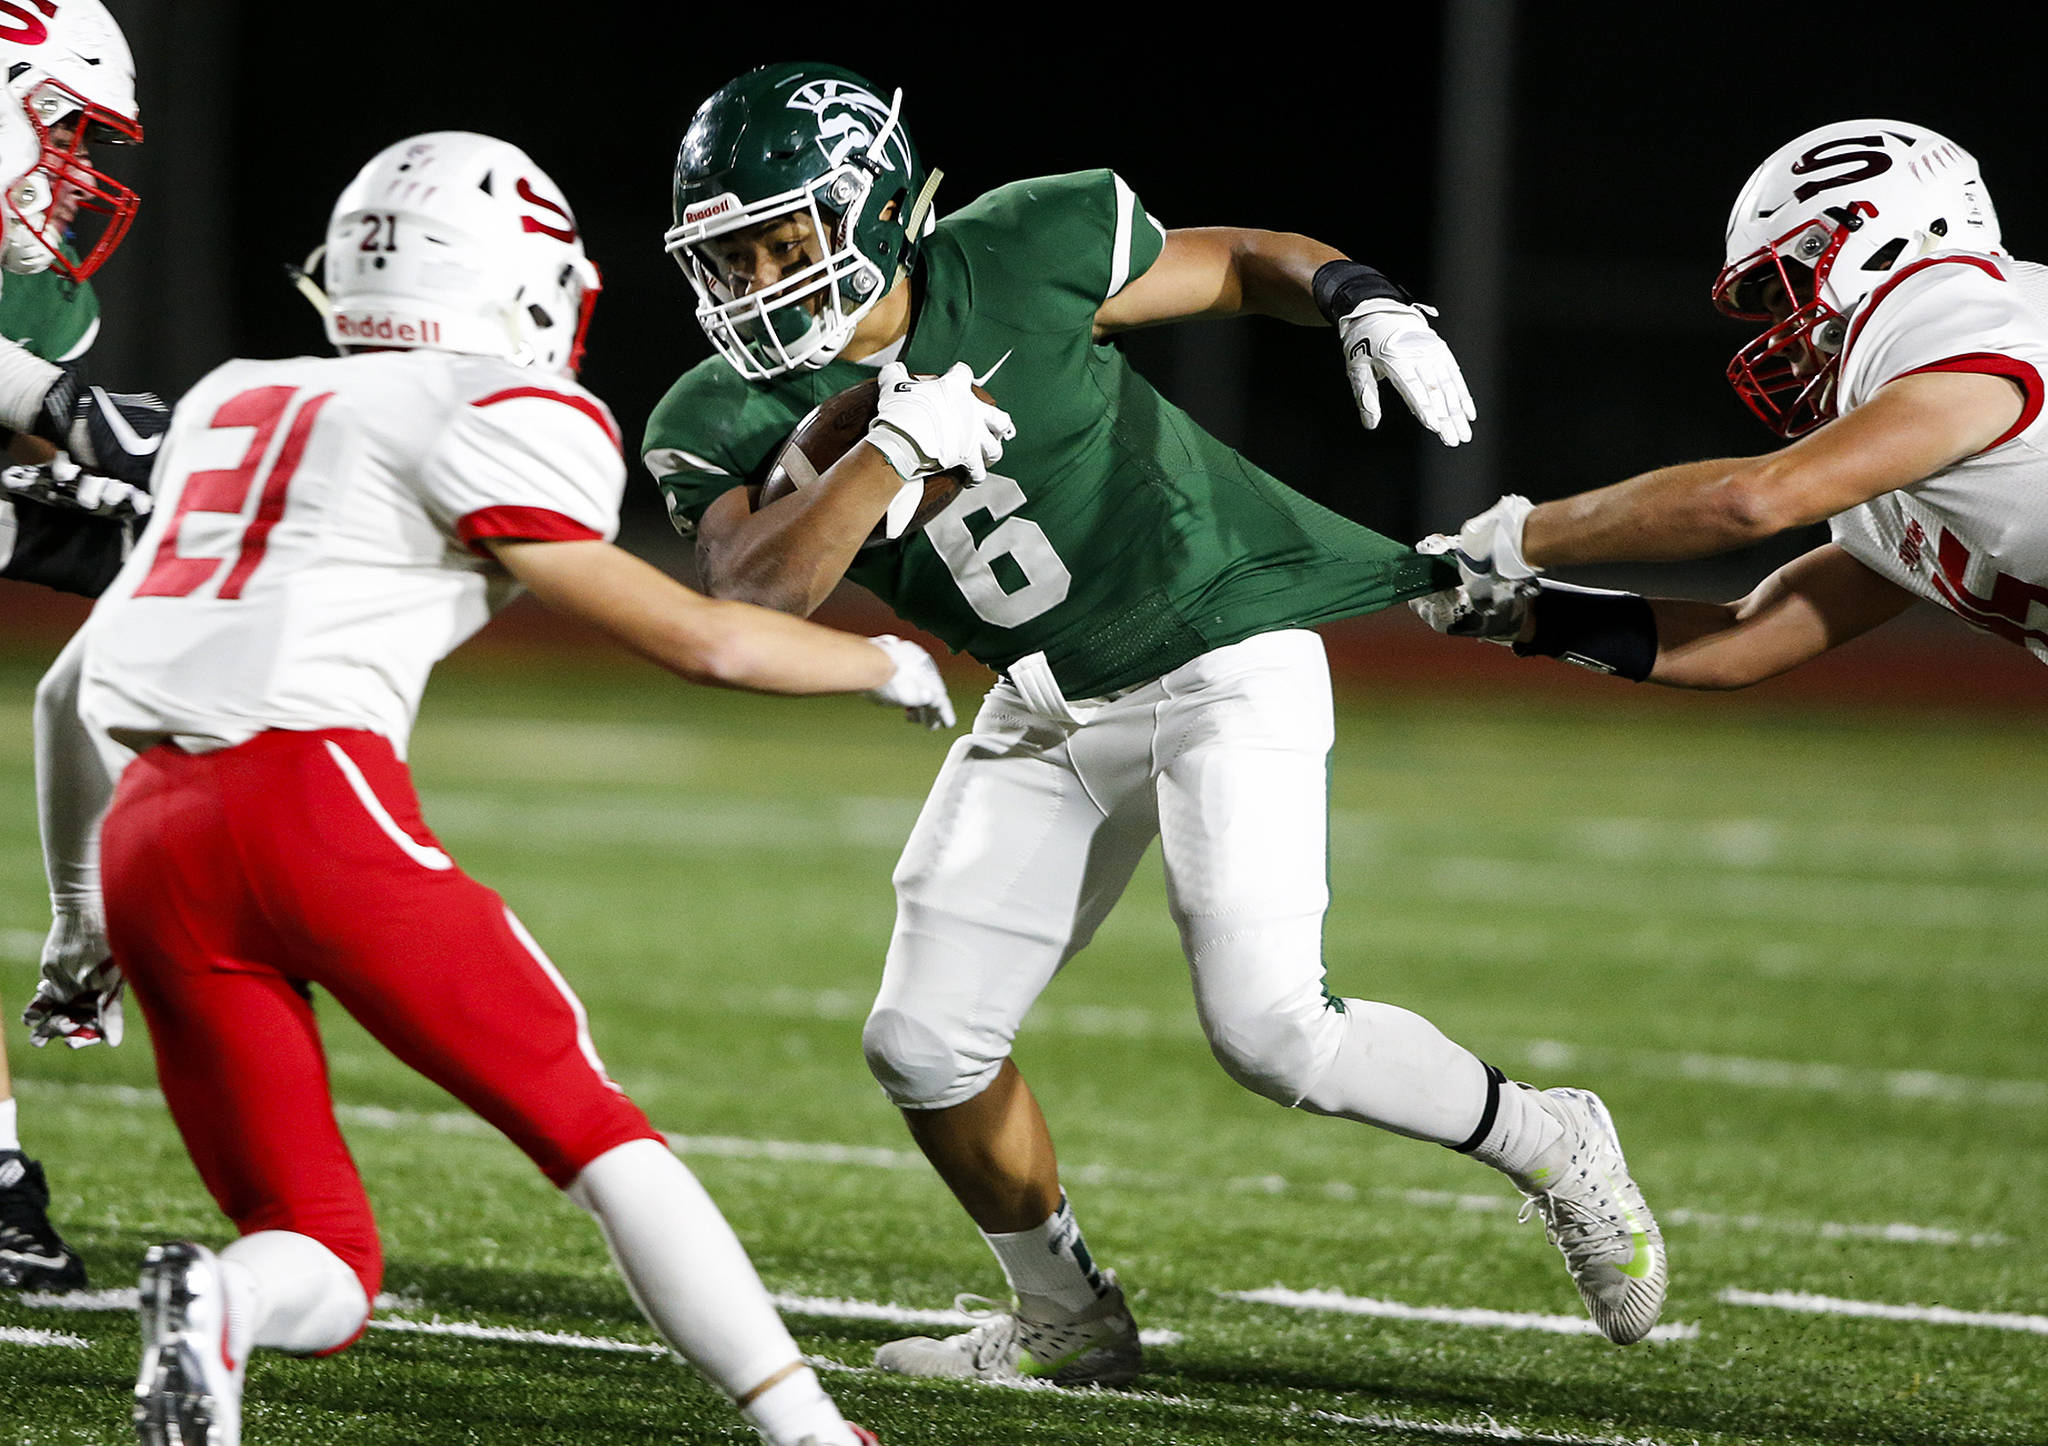 Edmonds-Woodway’s Cappasio Cherry (6) breaks a tackle during a game against Snohomish at Edmonds Stadium on Friday, Oct. 27. (Ian Terry / The Herald)